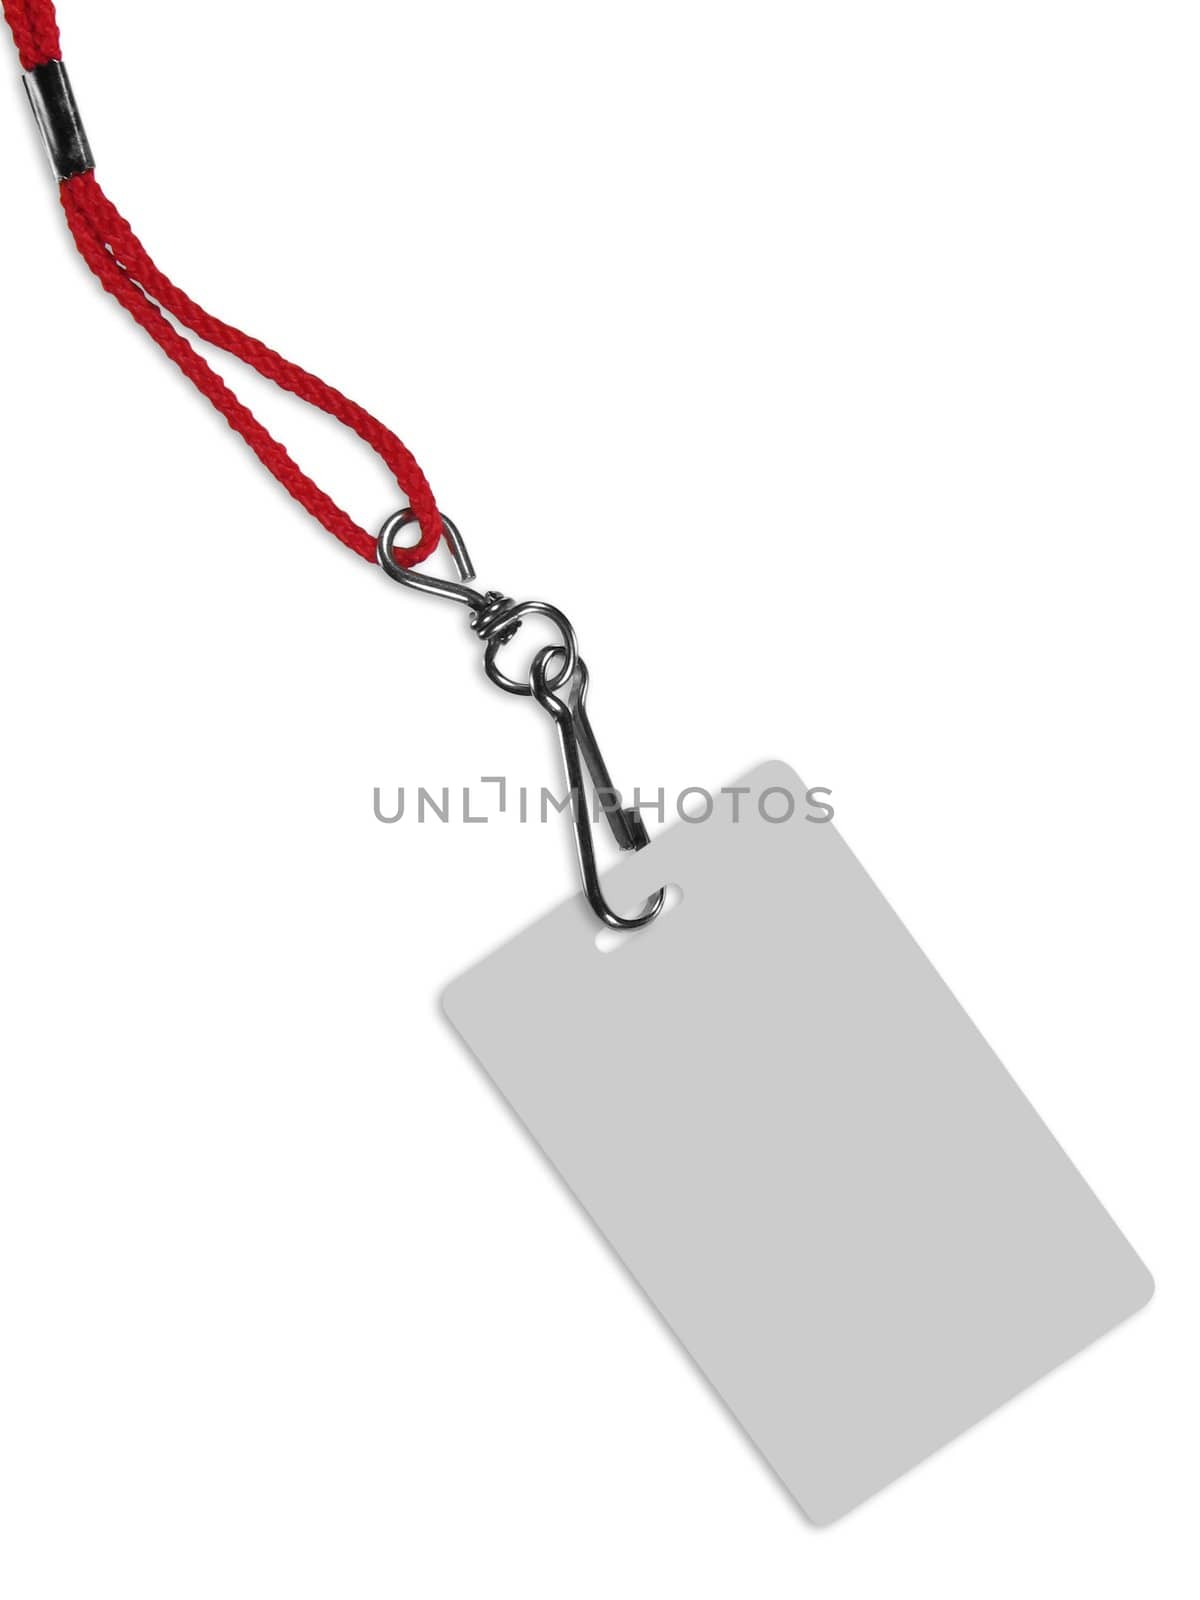 Blank badge with copy space (+ clipping path) by anikasalsera